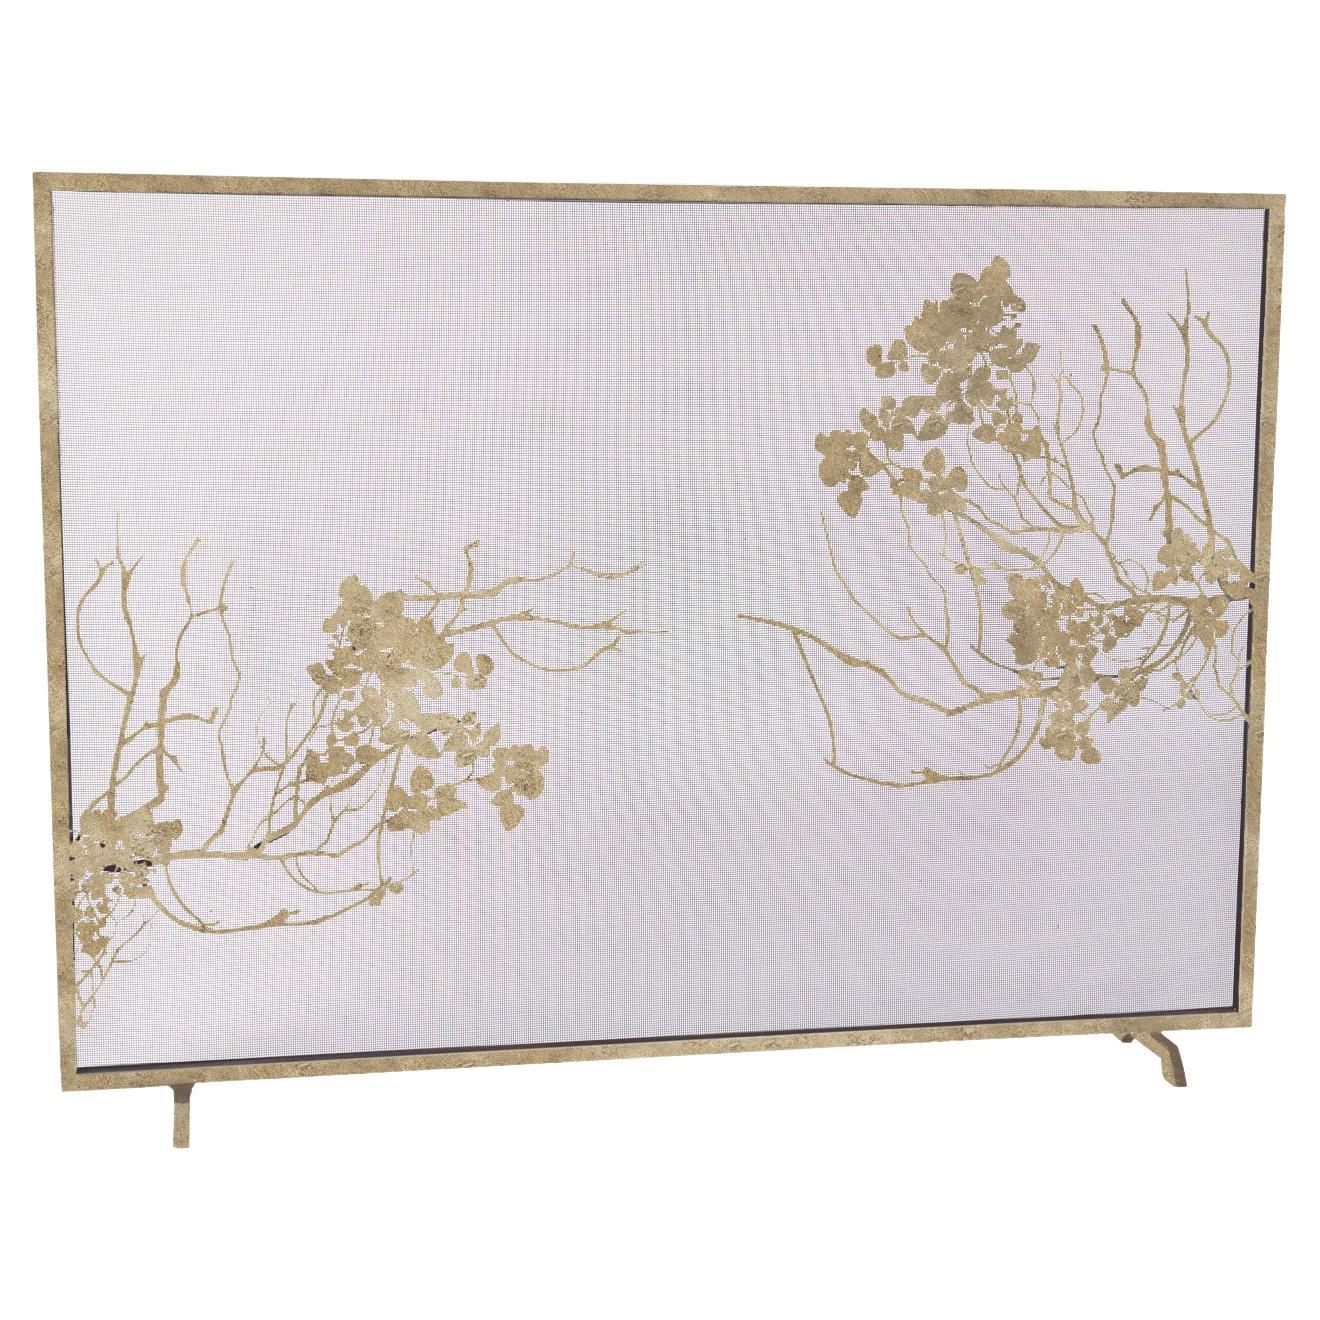 Madalyn Fireplace Screen in a Aged Silver Finish by Claire Crowe For Sale